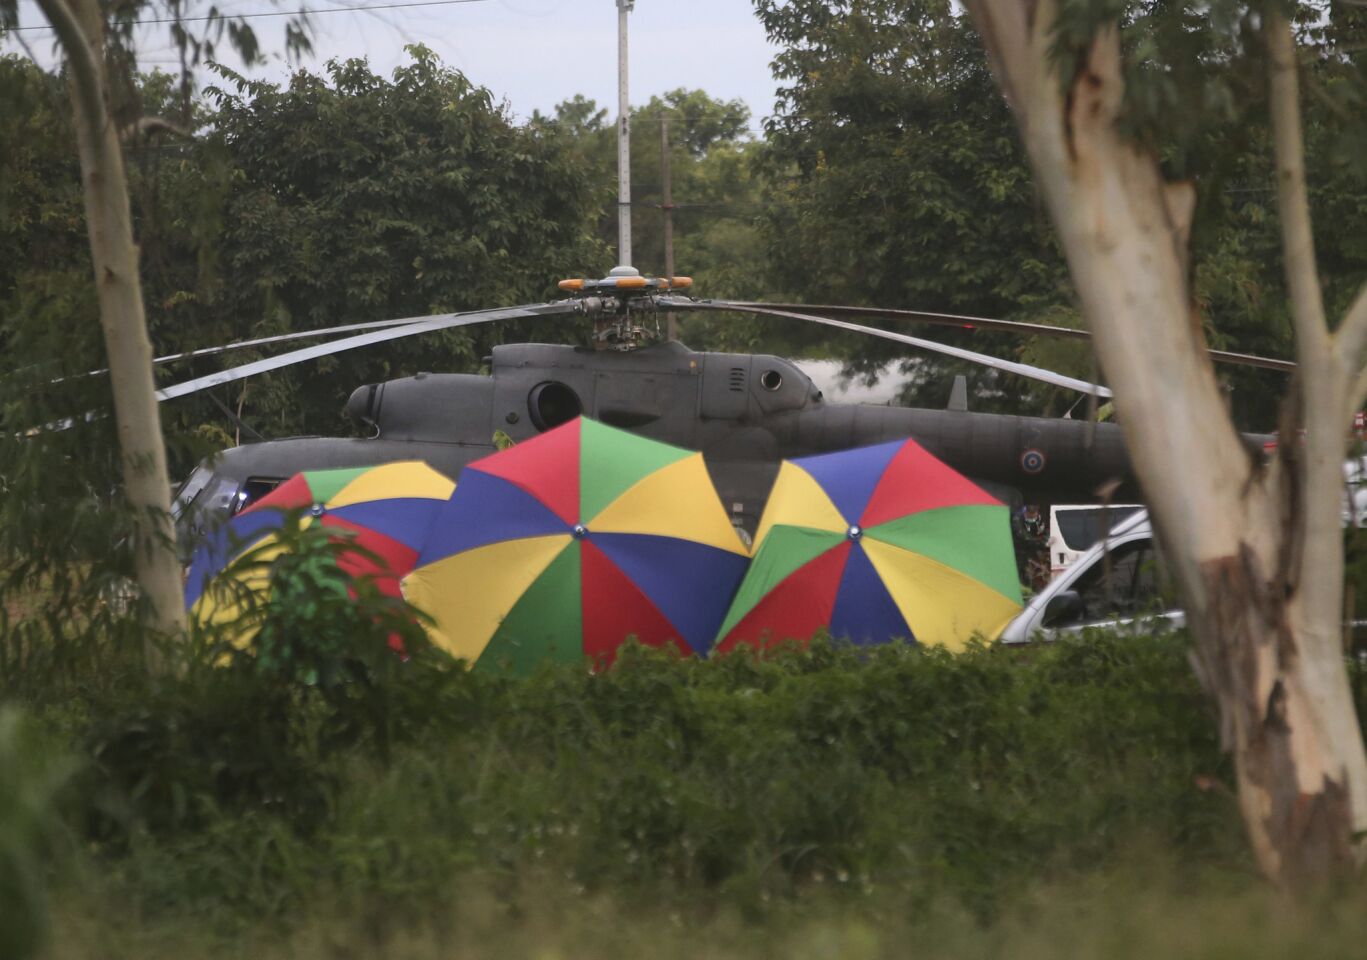 Police place umbrellas around an evacuation helicopter after the last of the trapped boys and their coach were extracted from a cave in Mae Sai, Thailand on July 10.